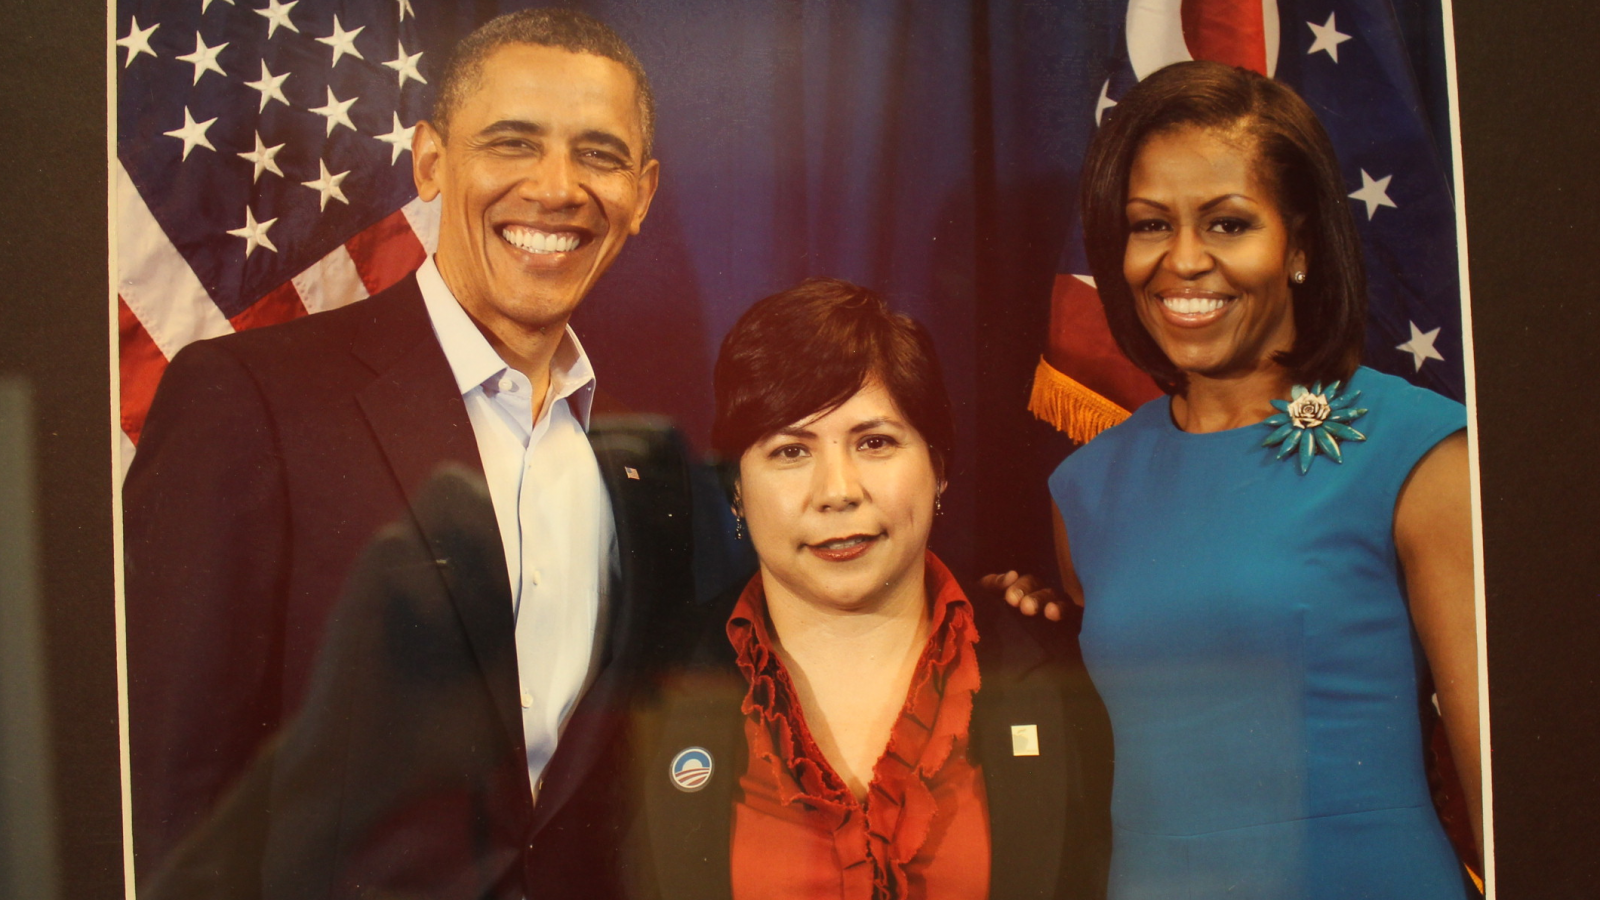 Ramona with President Obama and Michelle Obama